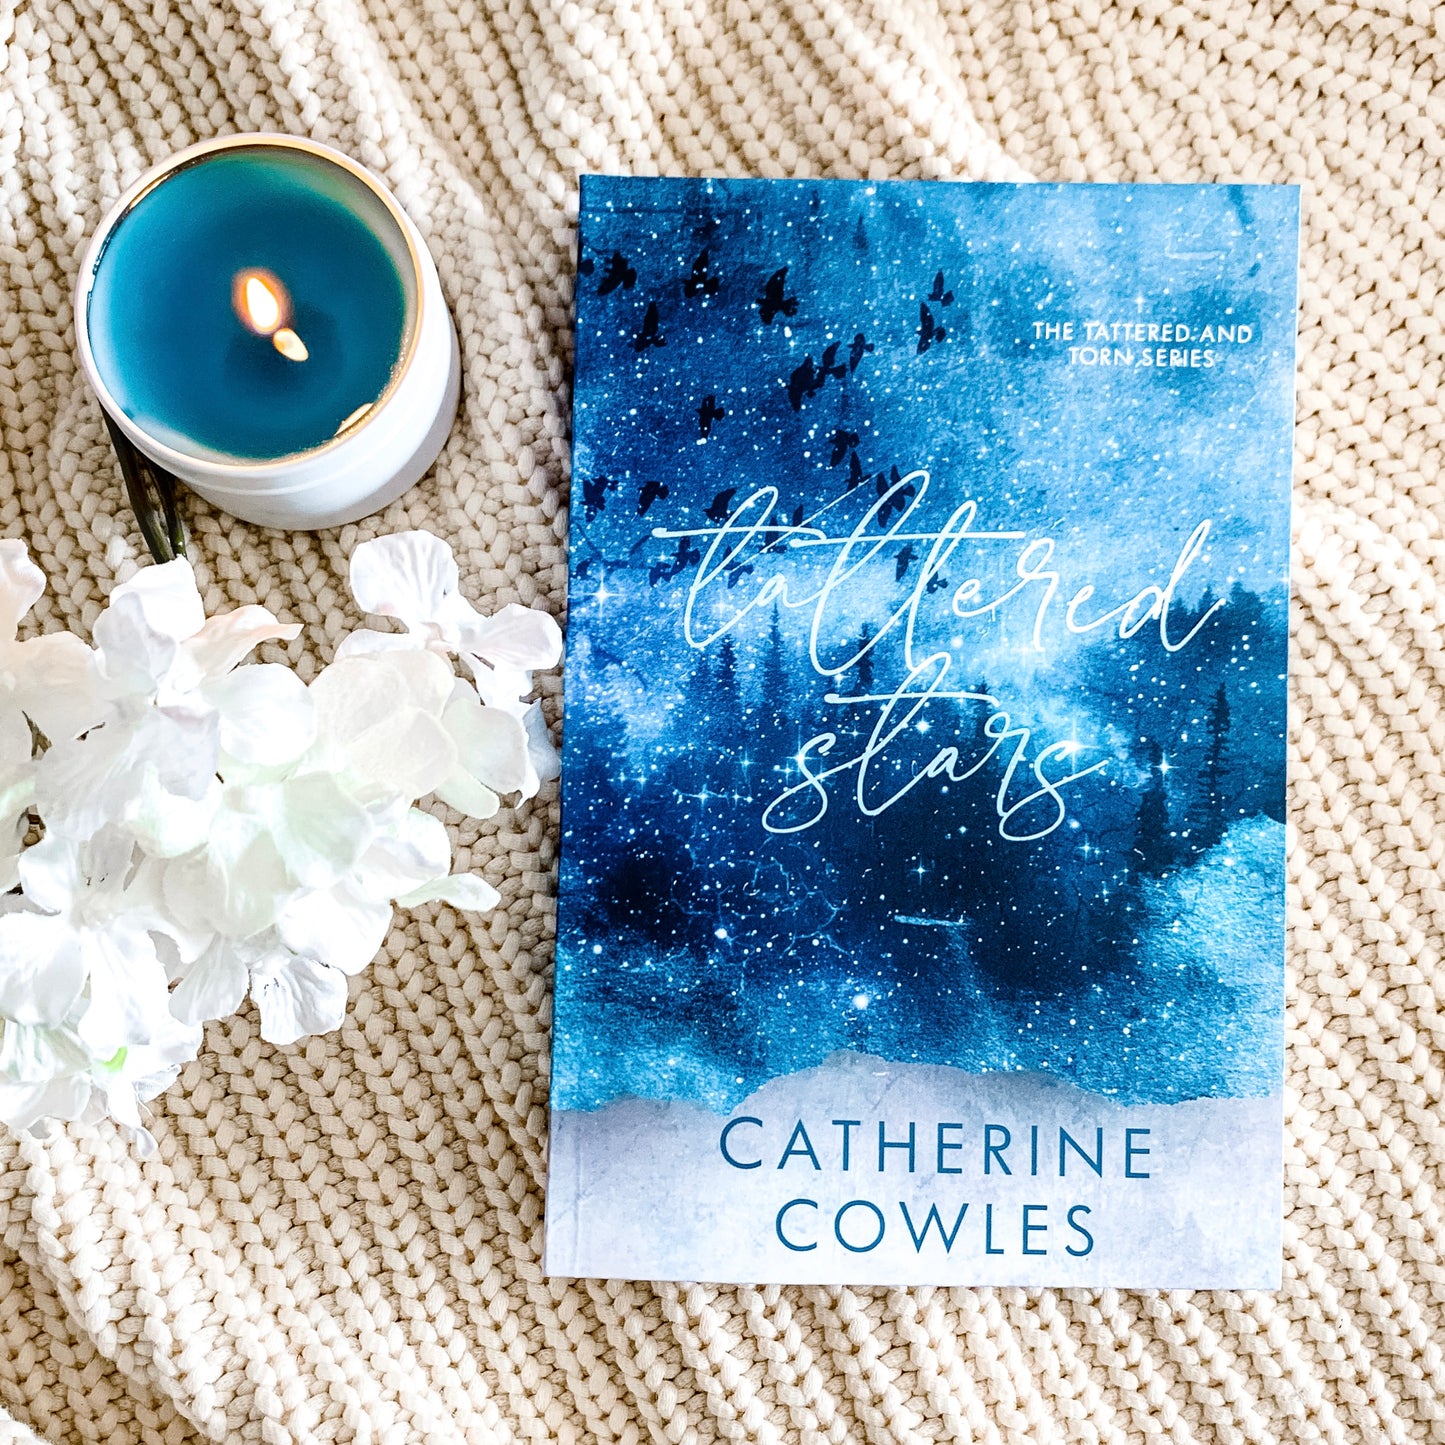 The Tattered & Torn Special Editions by Catherine Cowles